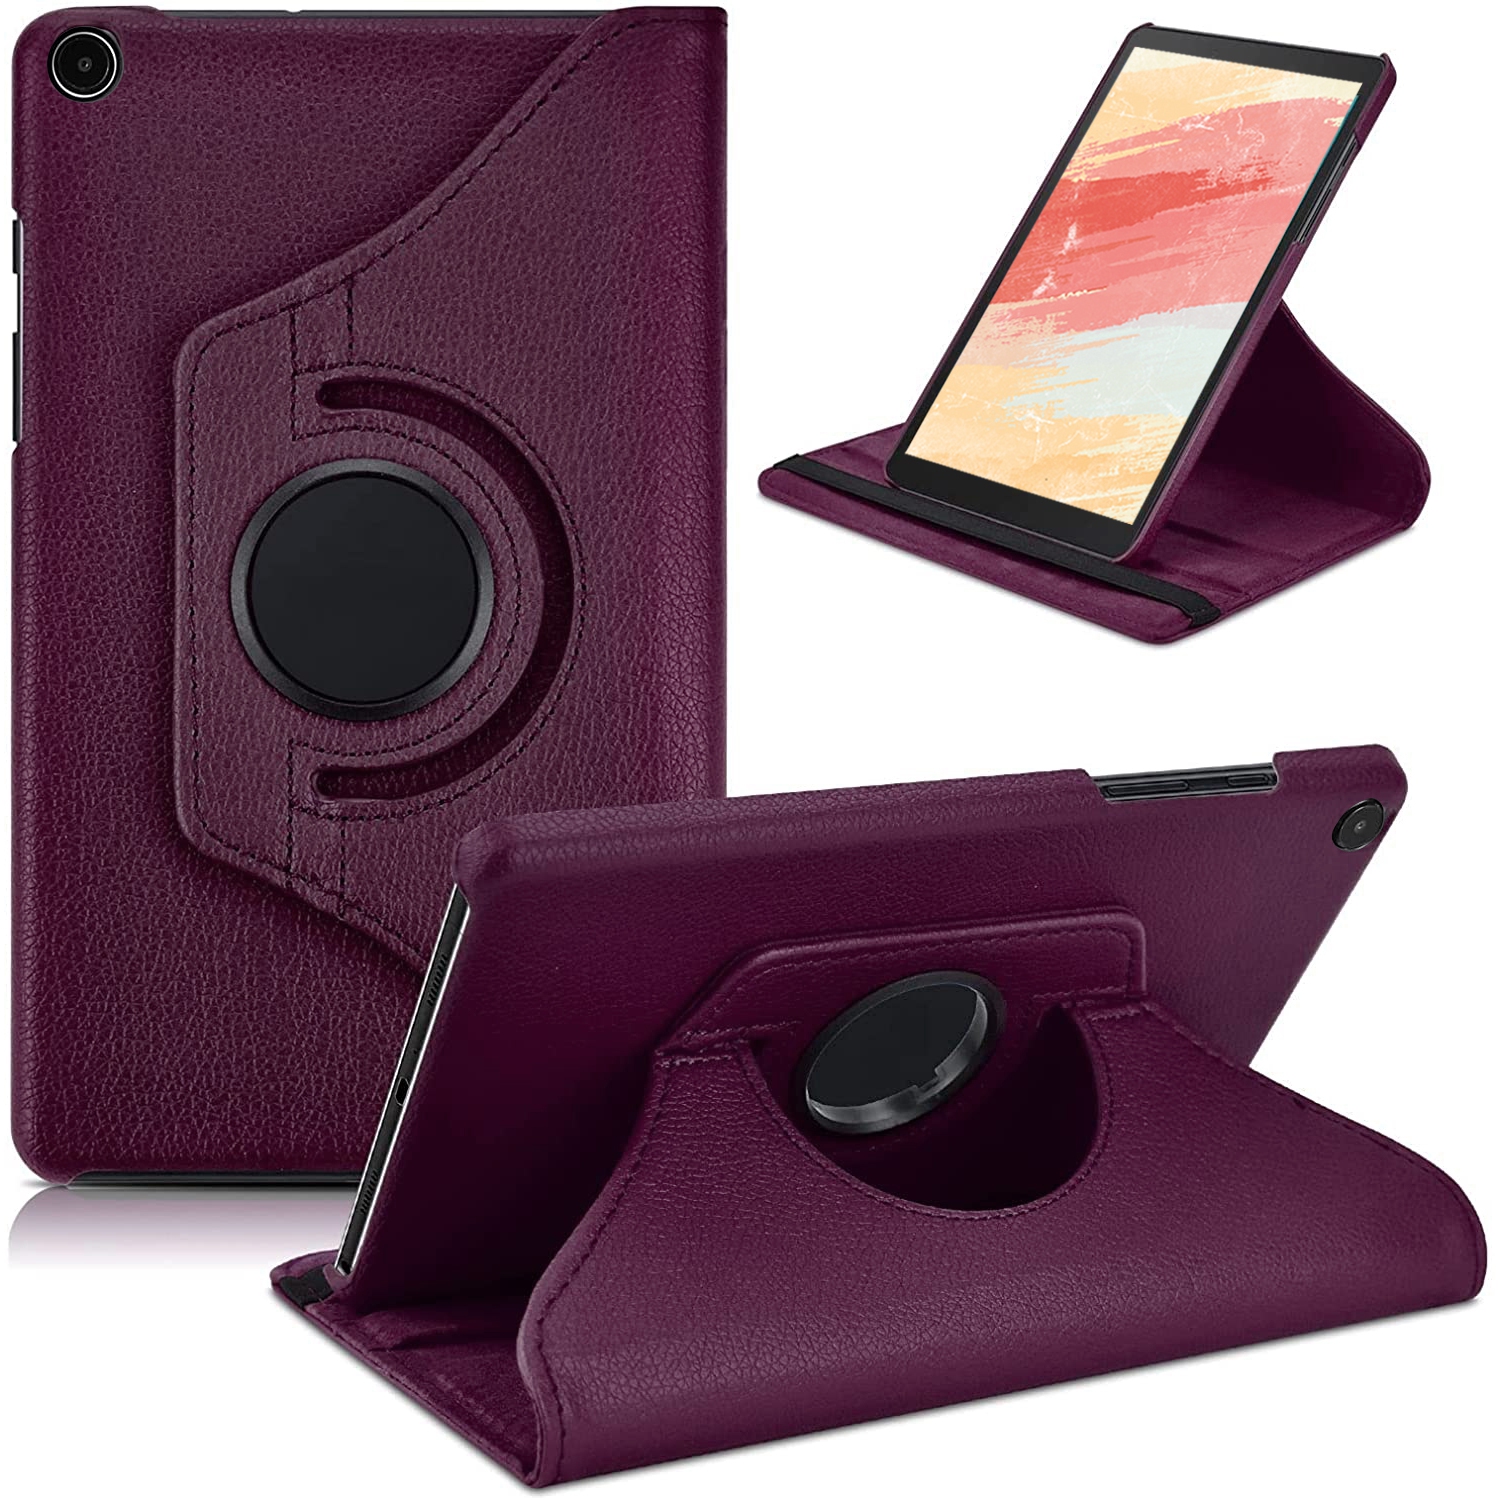 XCRS 360° Swivel Rotating Case for Samsung Galaxy Tab A8 10.5 inch 2022, (Model SM-X200/SM-X205) Multi-Angle Viewing Stand, PU Leather Cover, with Protective Elastic Strap